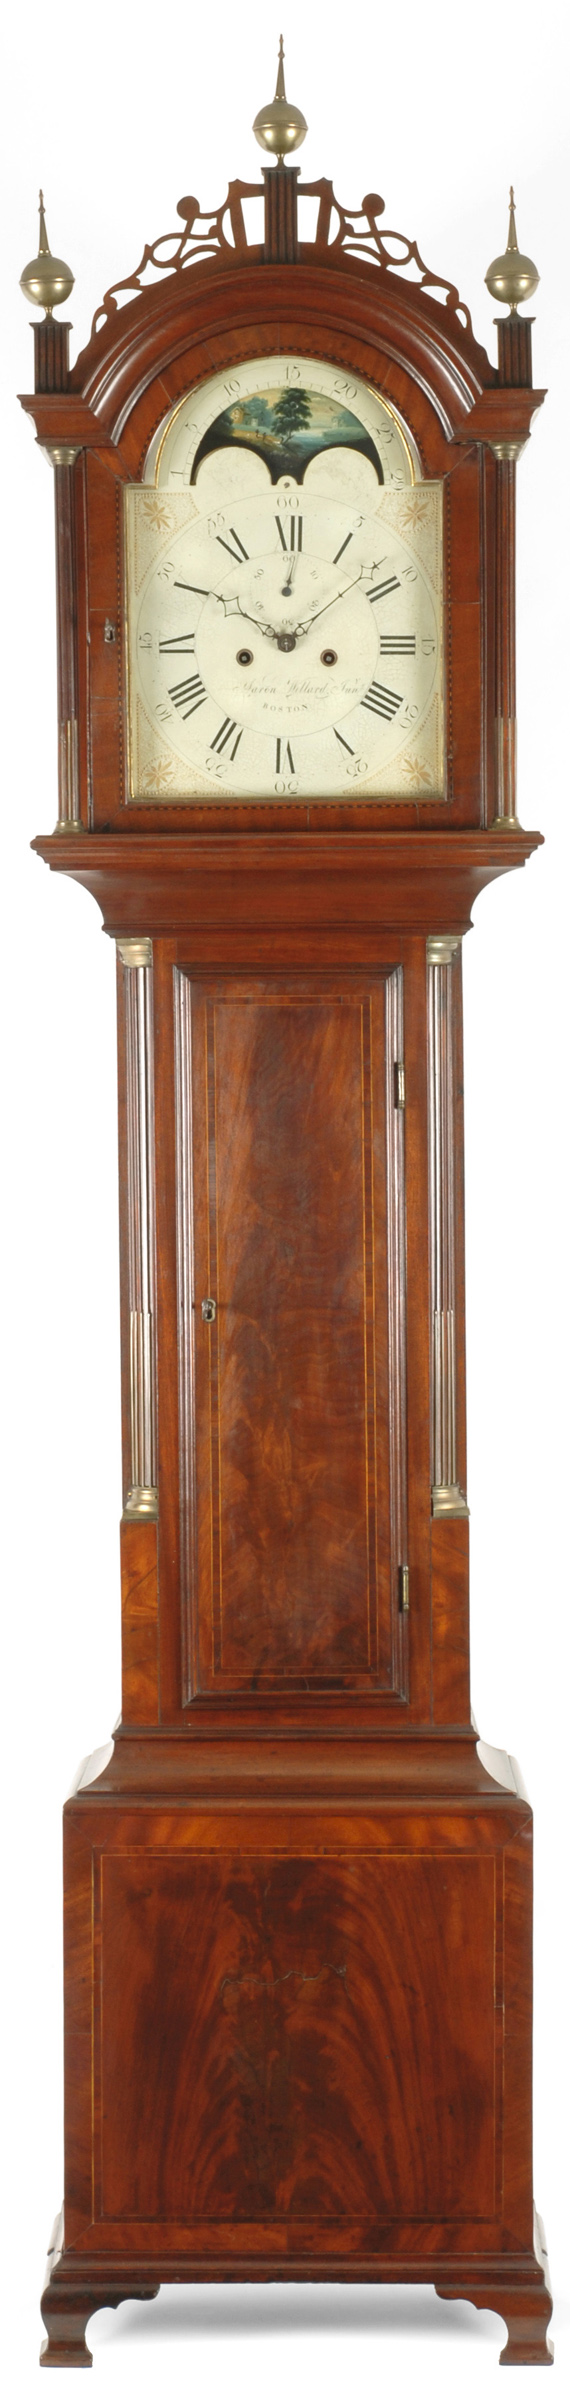 An exceptional labeled mahogany tall case clock by Aaron Willard Junior, Boston, circa 1805.